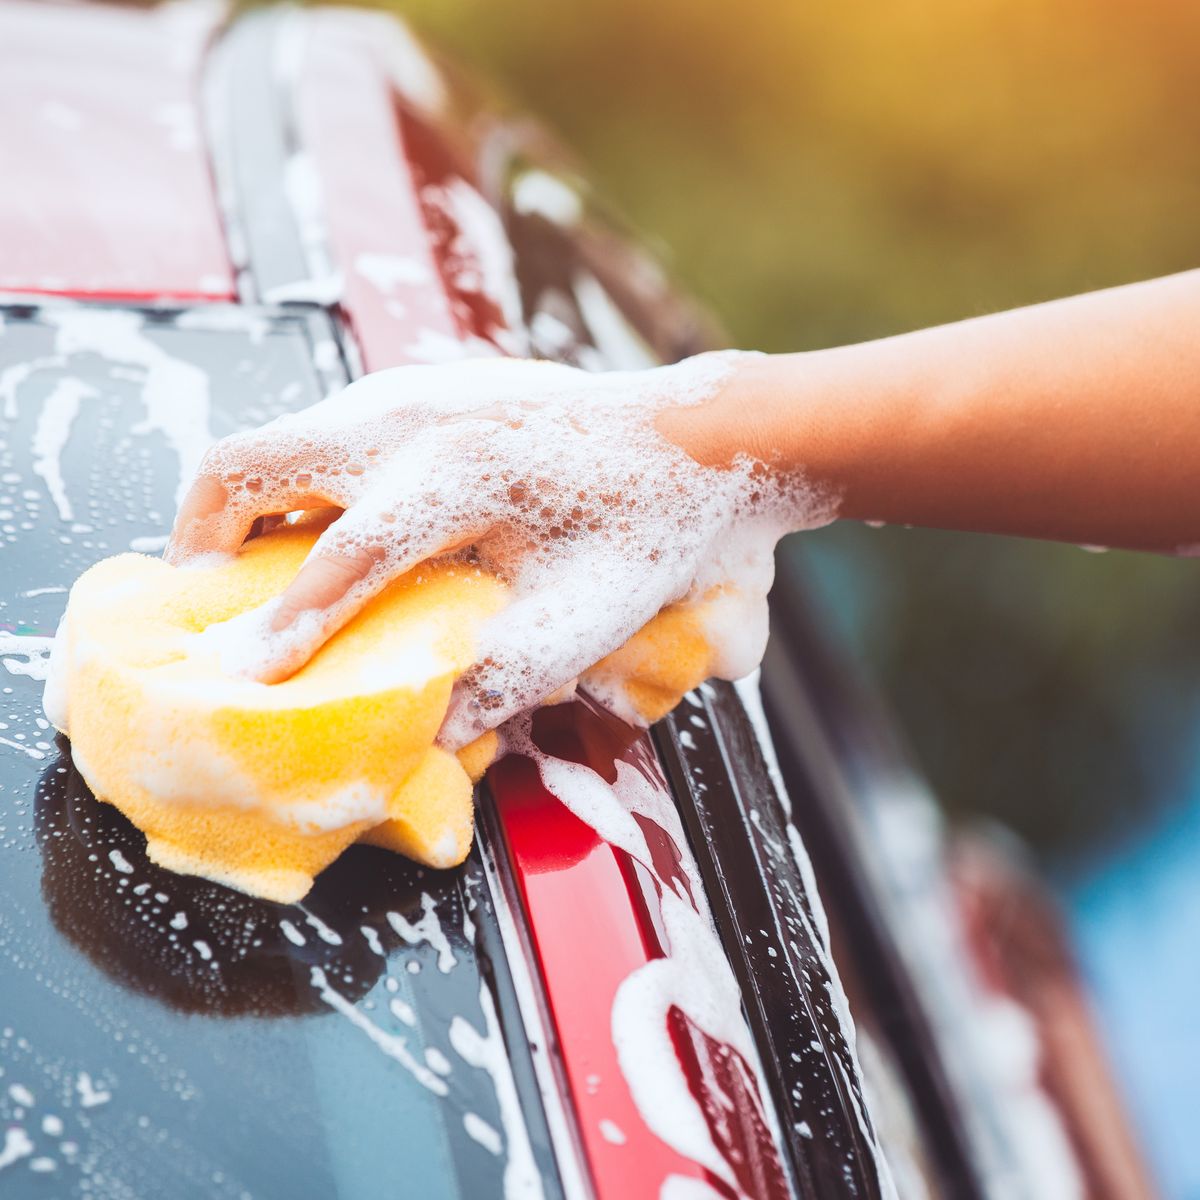 Automatic Car Wash Basics: Breaking Down the Value - Quick-Set Auto Glass